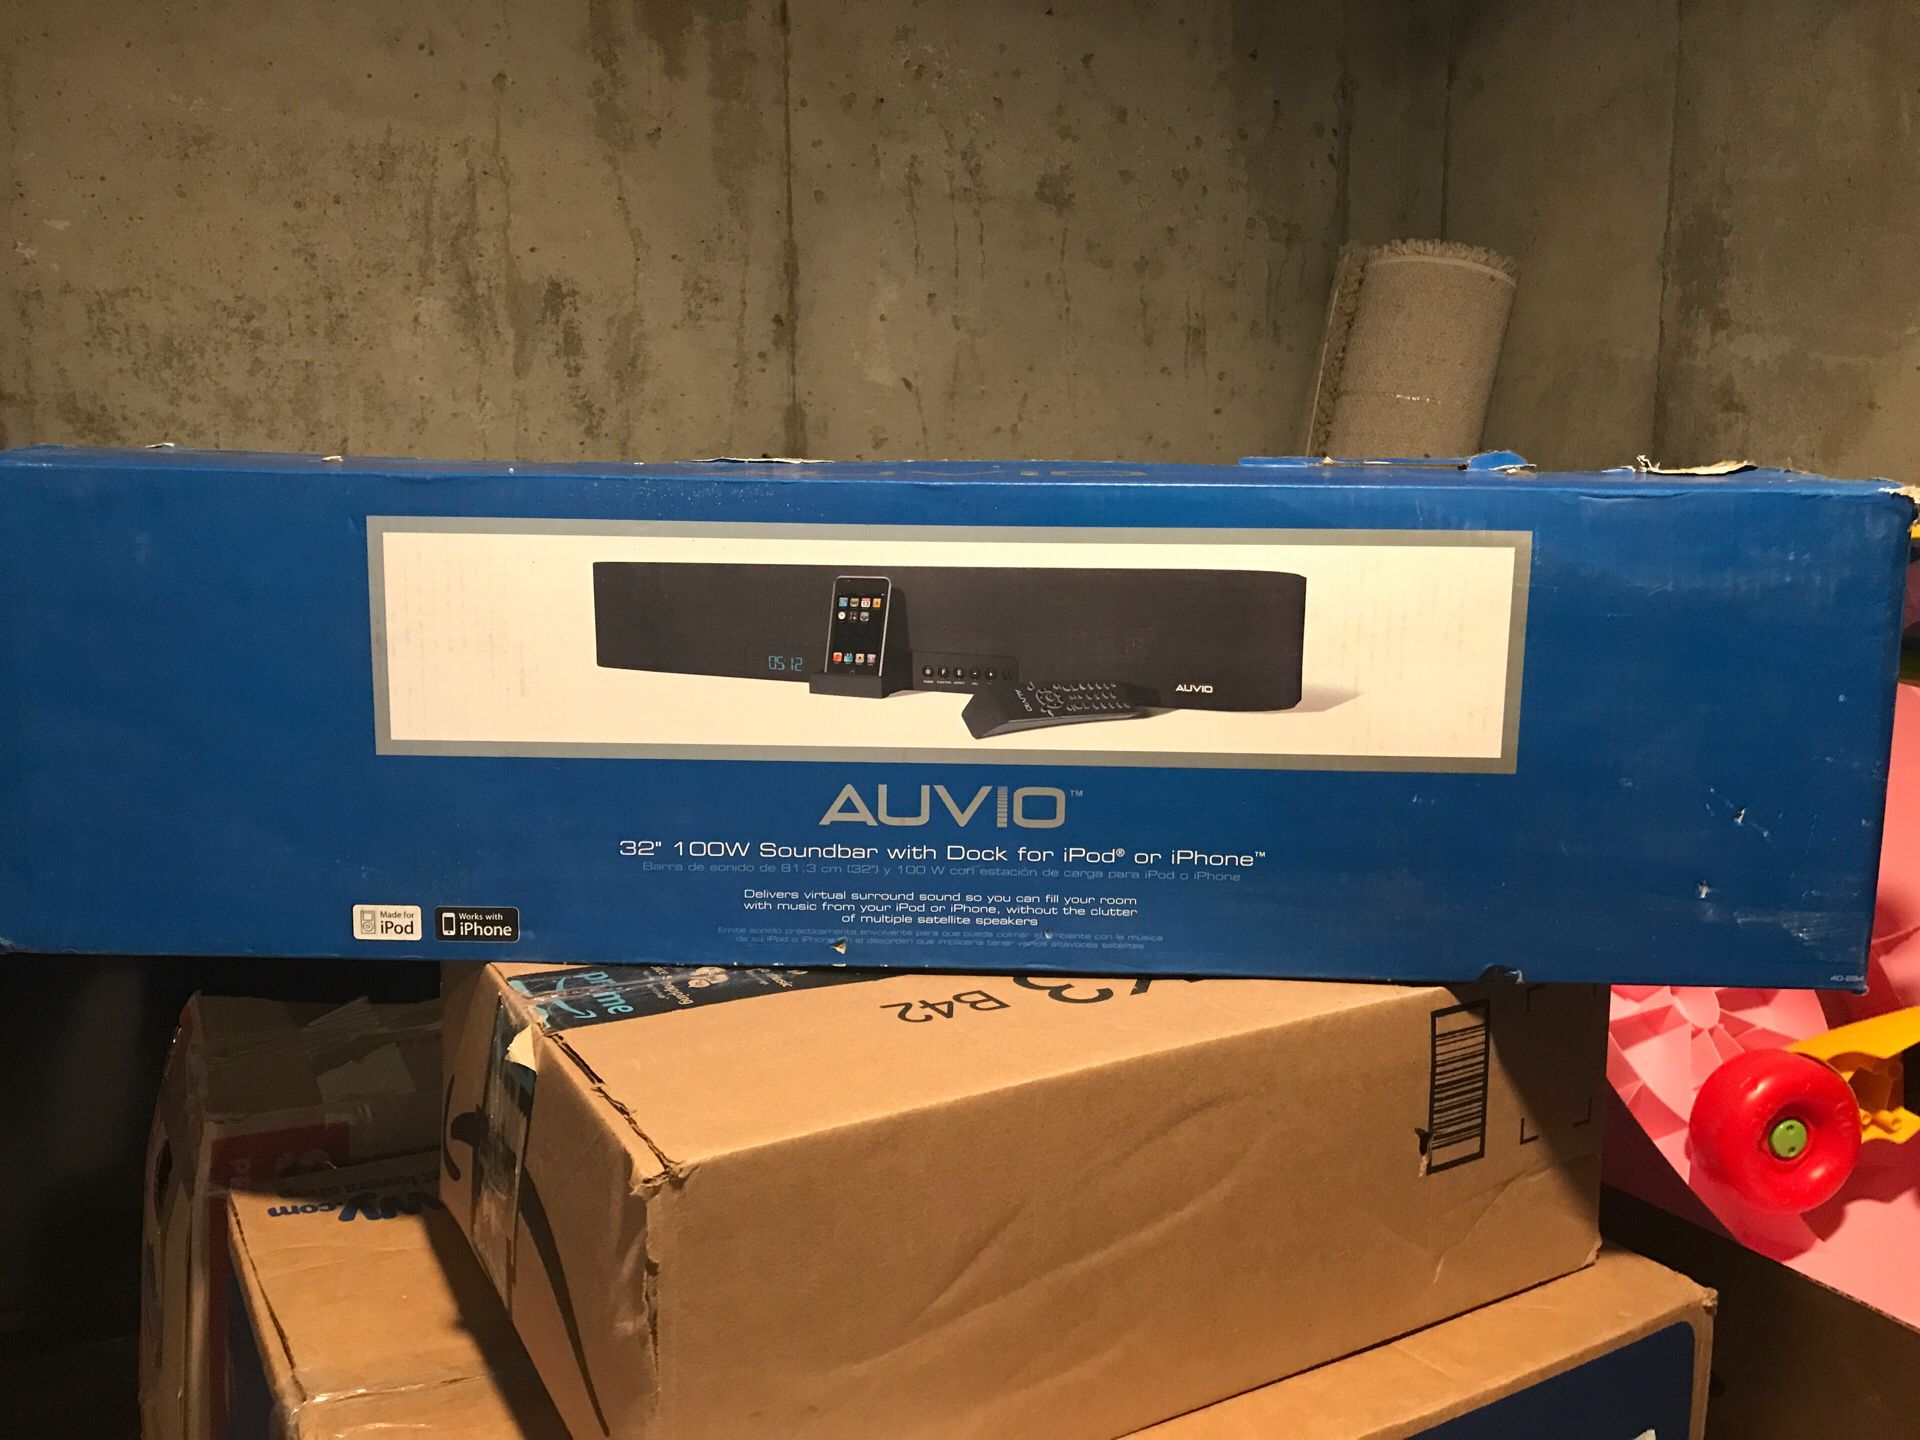 Auvio 32” 100W soundbar with Dock for IPOD or IPHONE